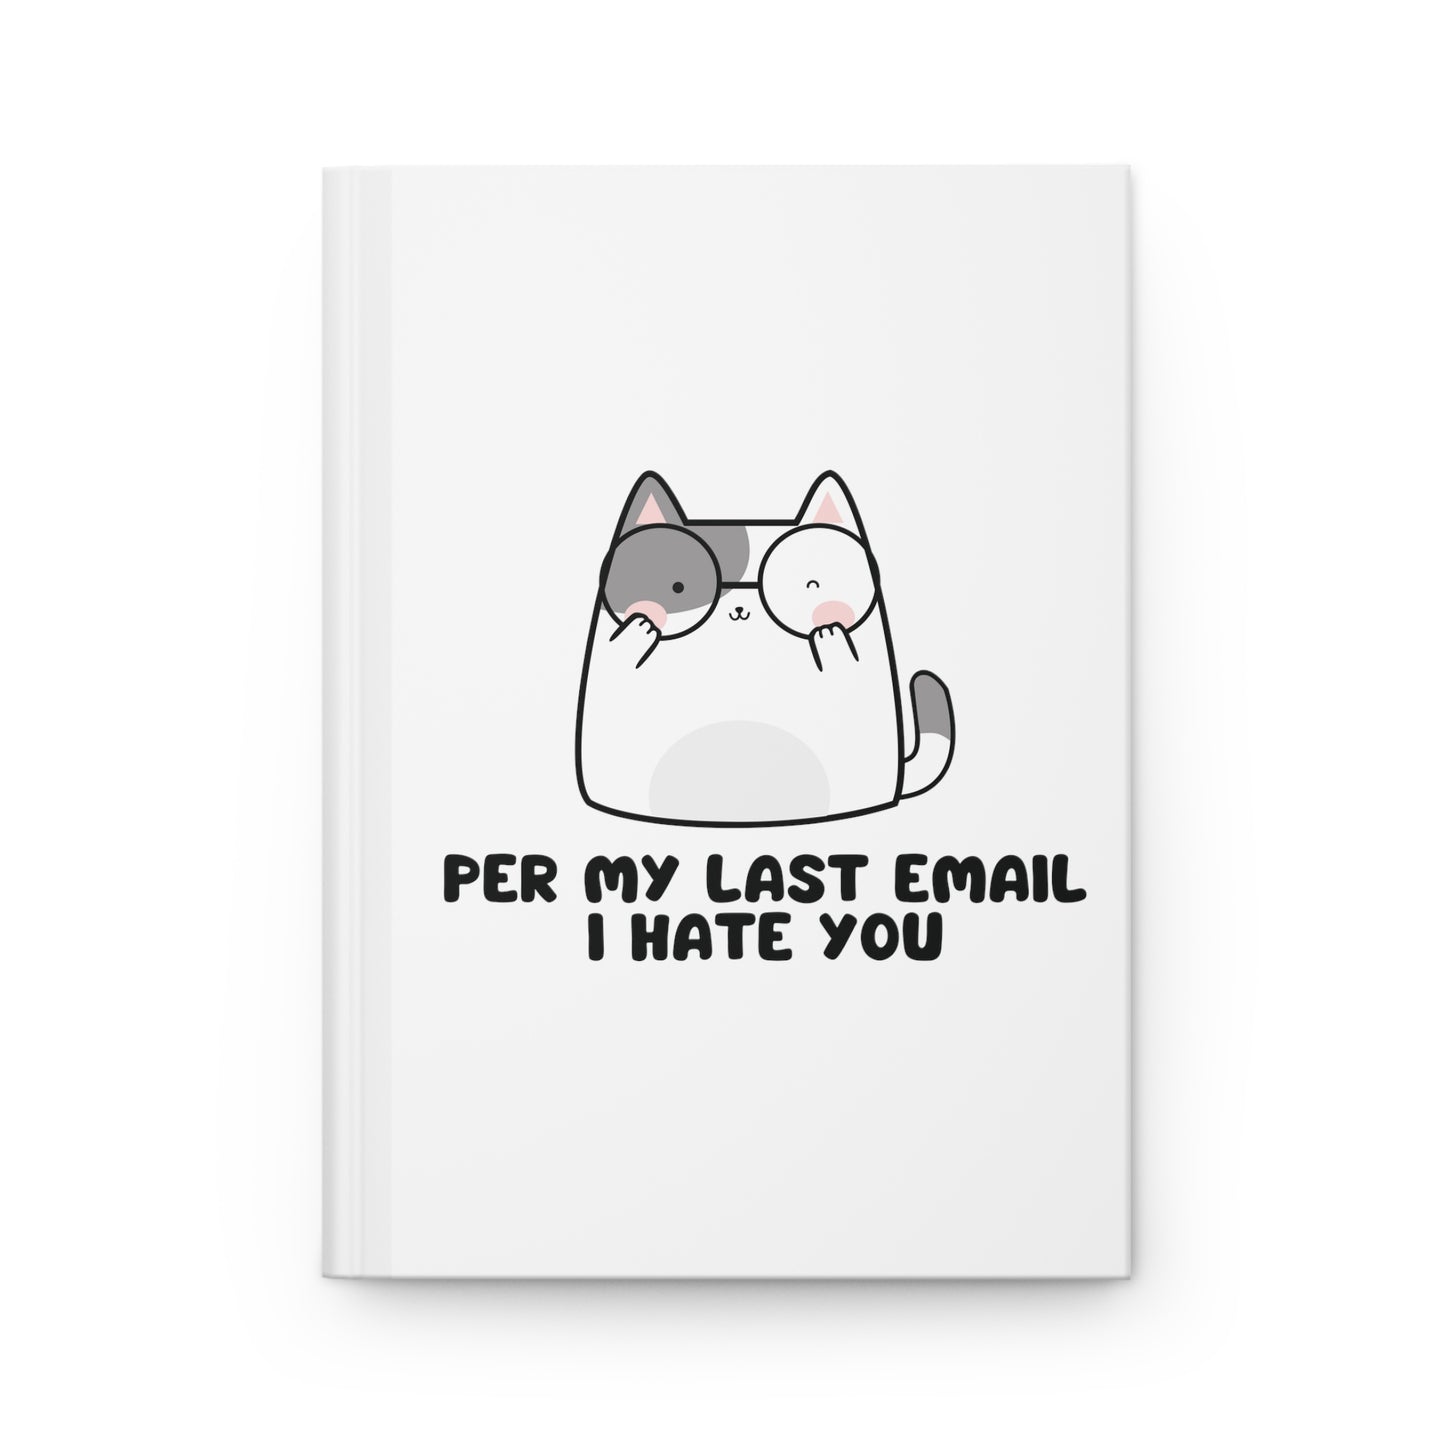 Per My Last Email I Hate You Hardcover Journal